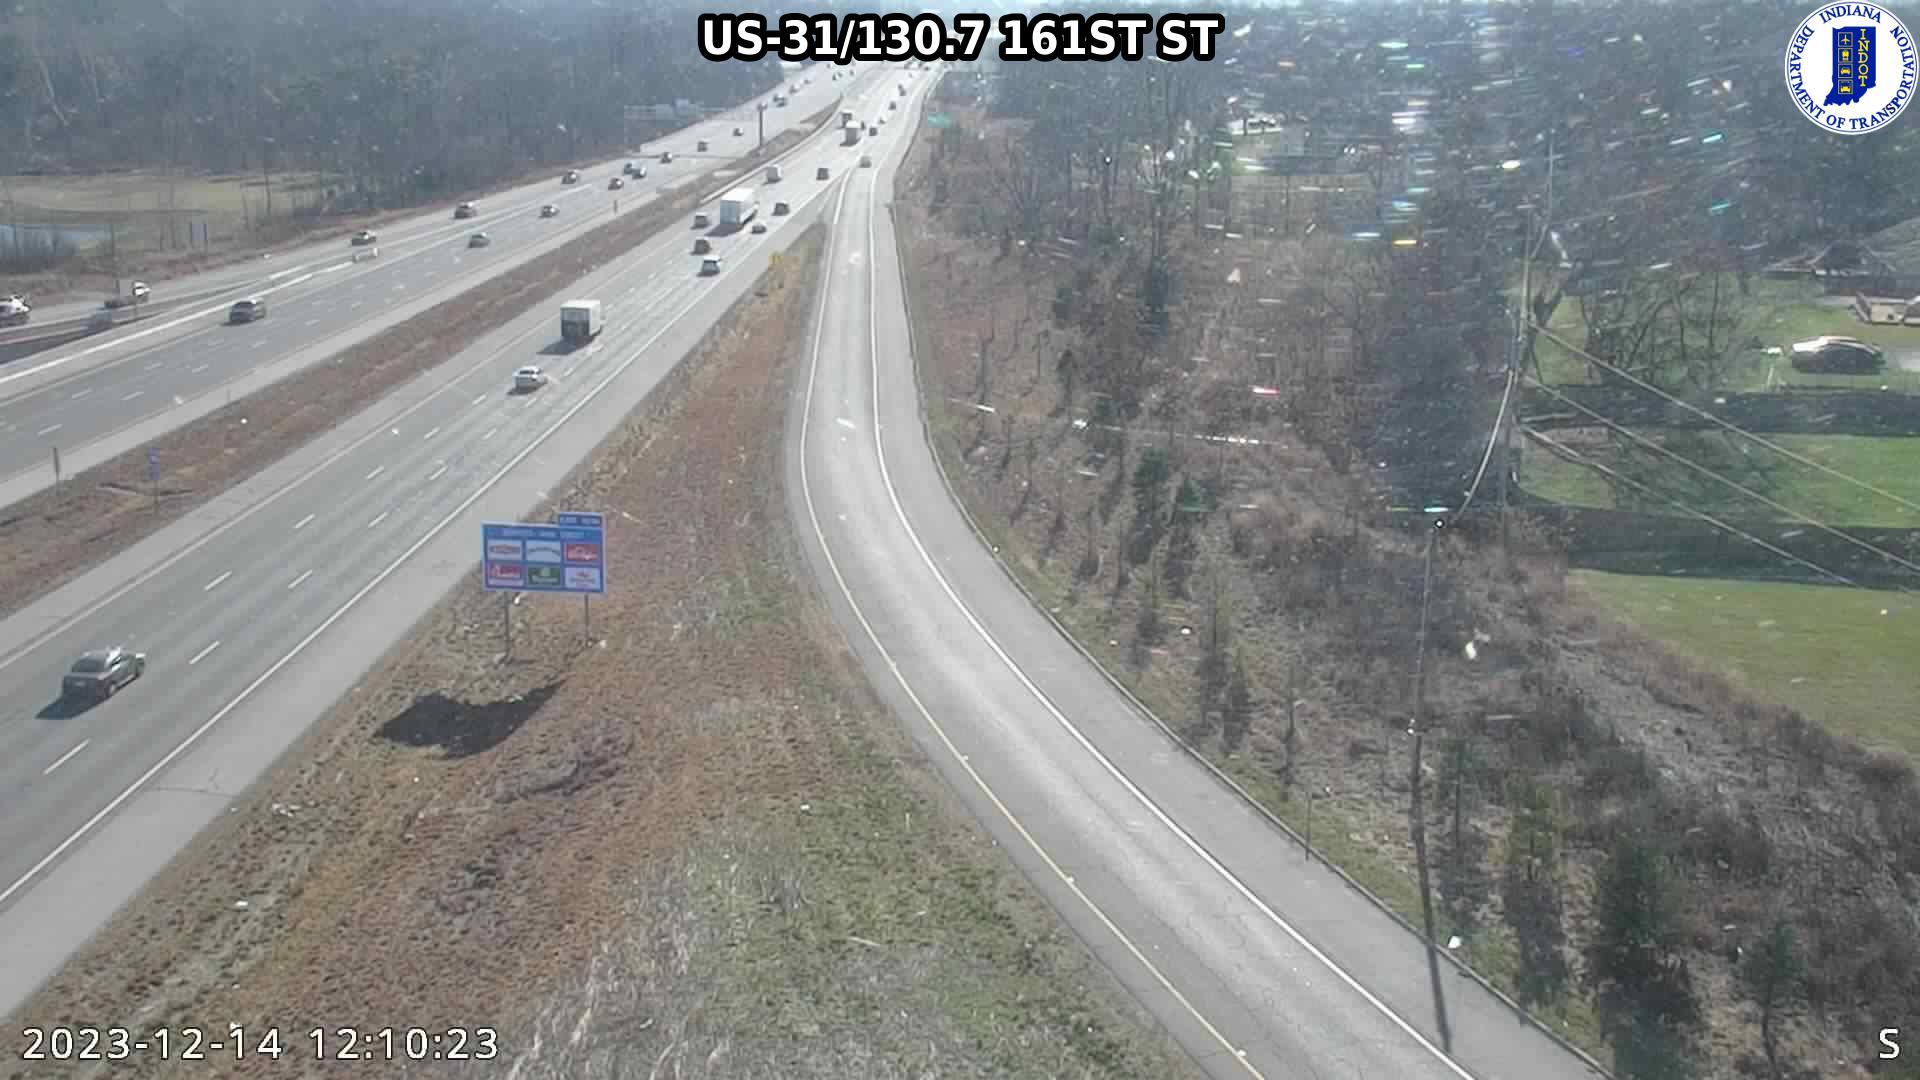 Traffic Cam Westfield: US-31: US-31/130.7 161ST ST Player